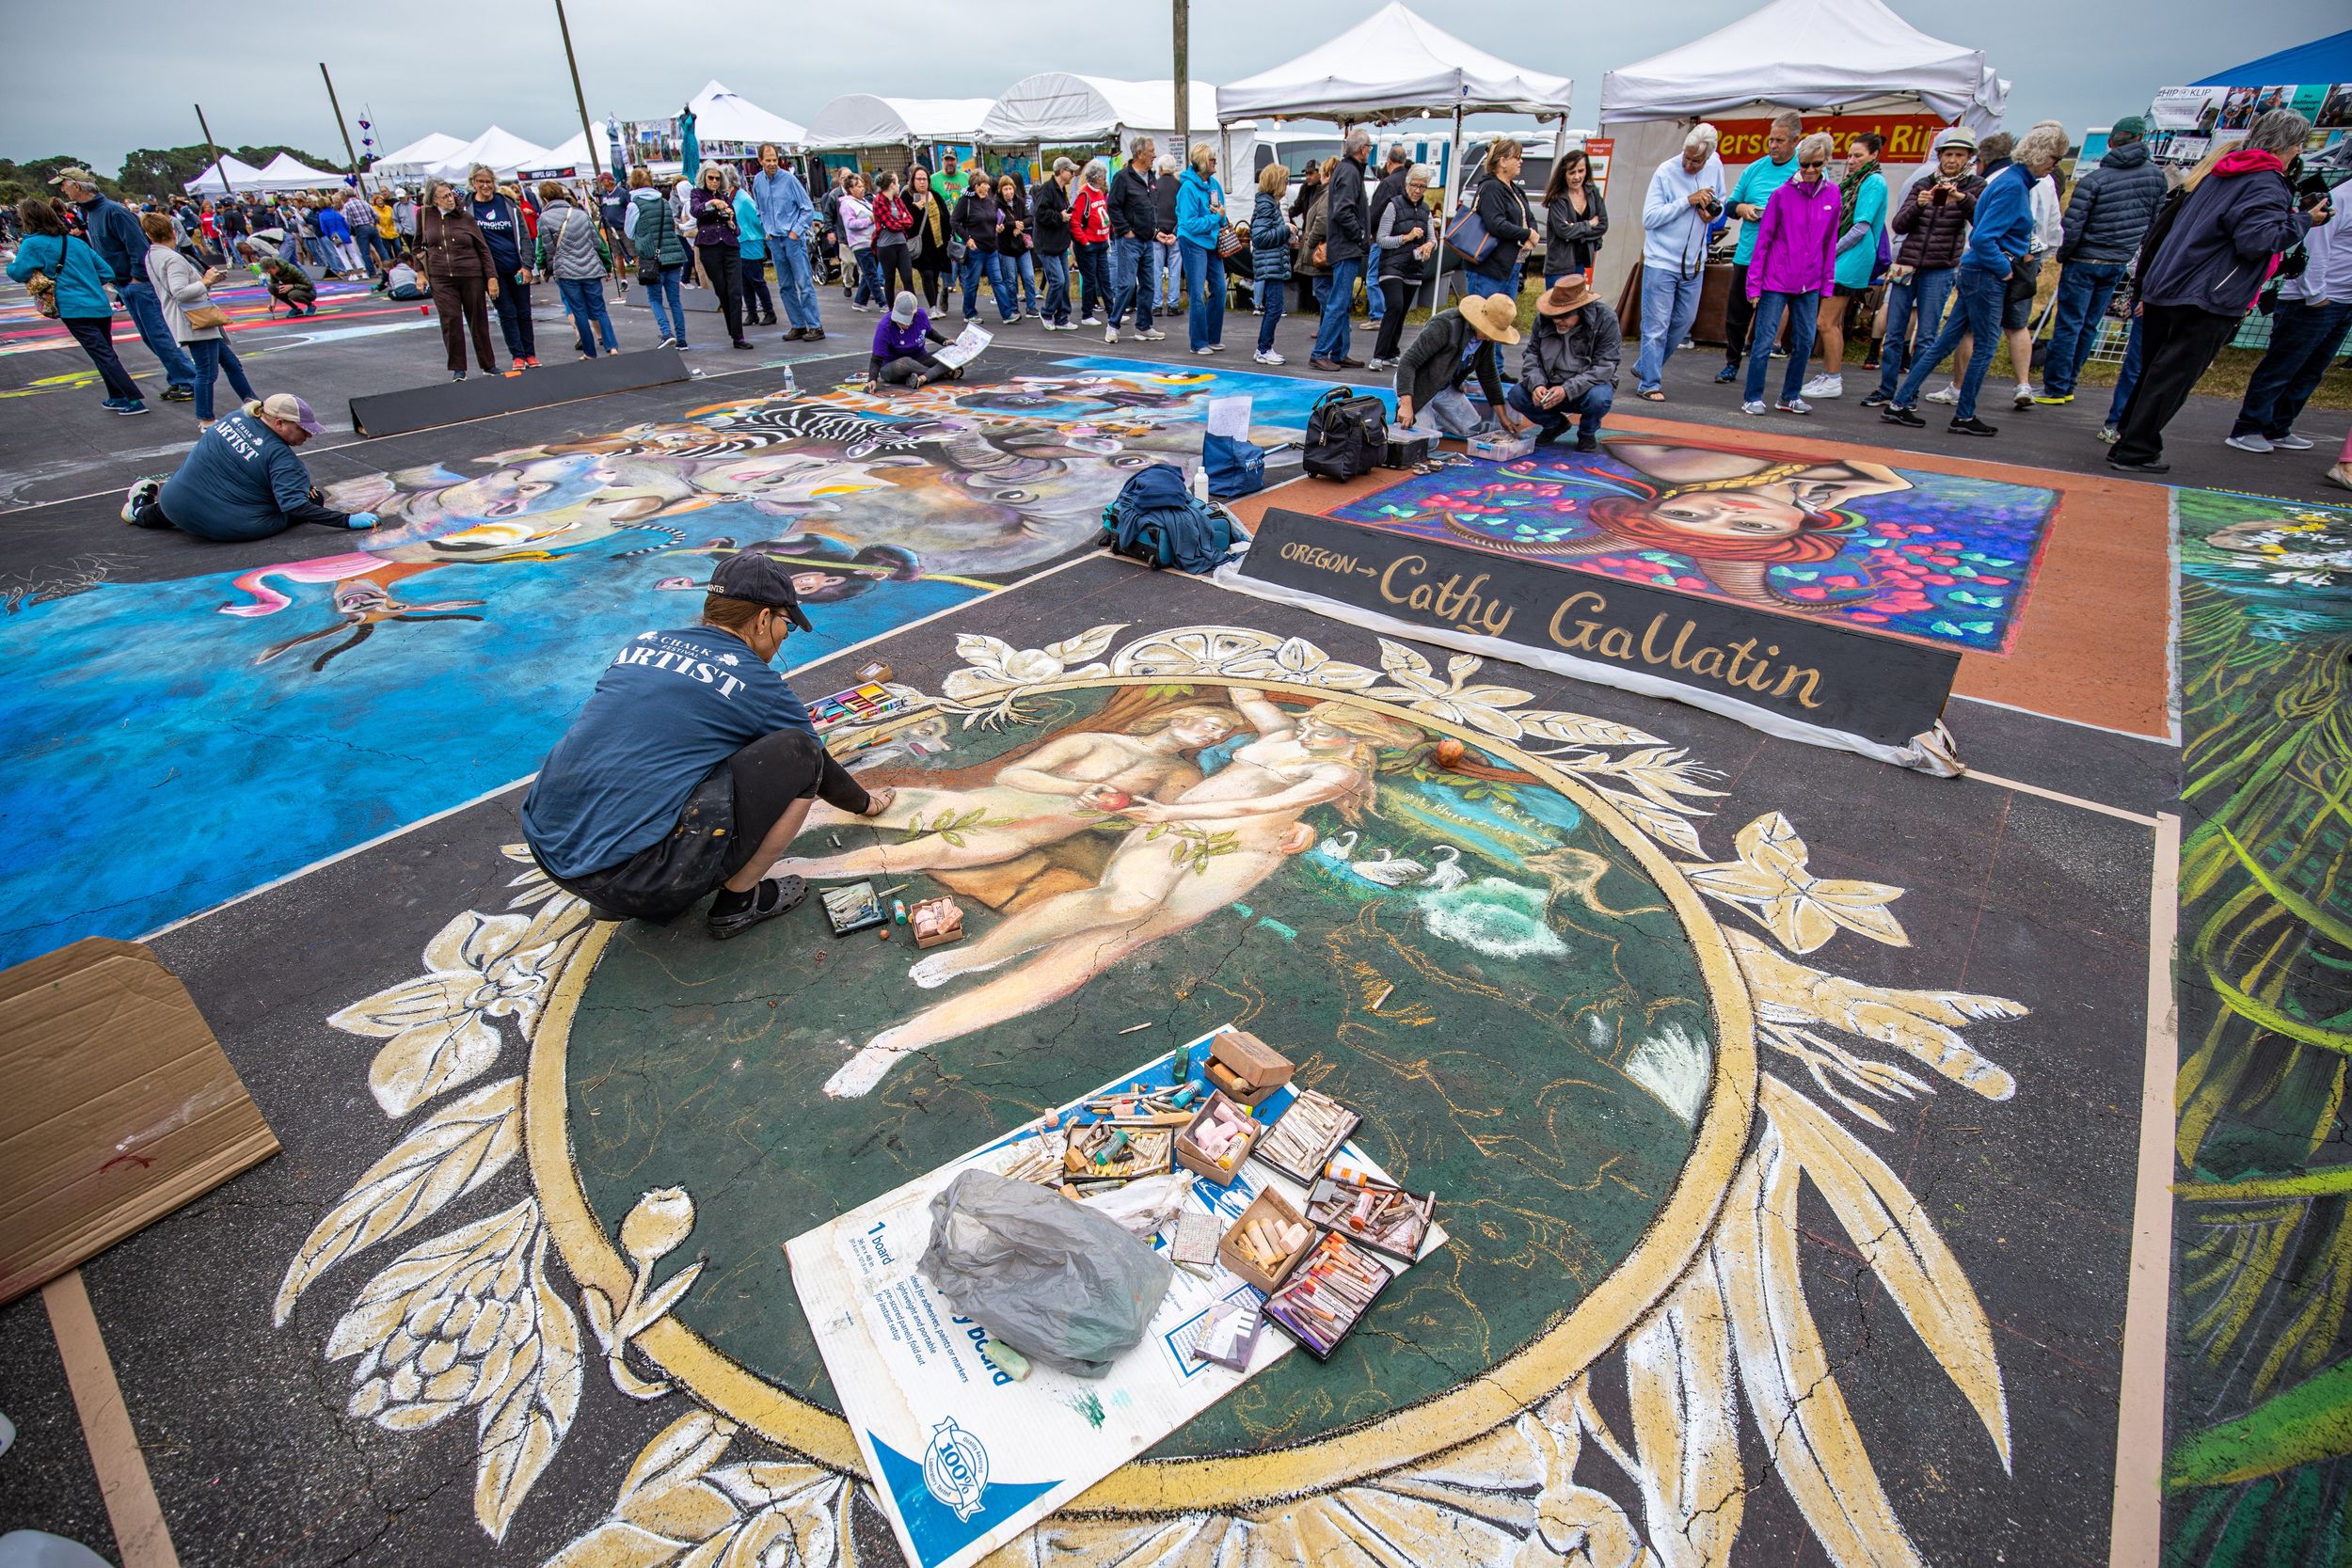 Chalk festival artists work on their commissioned pieces.